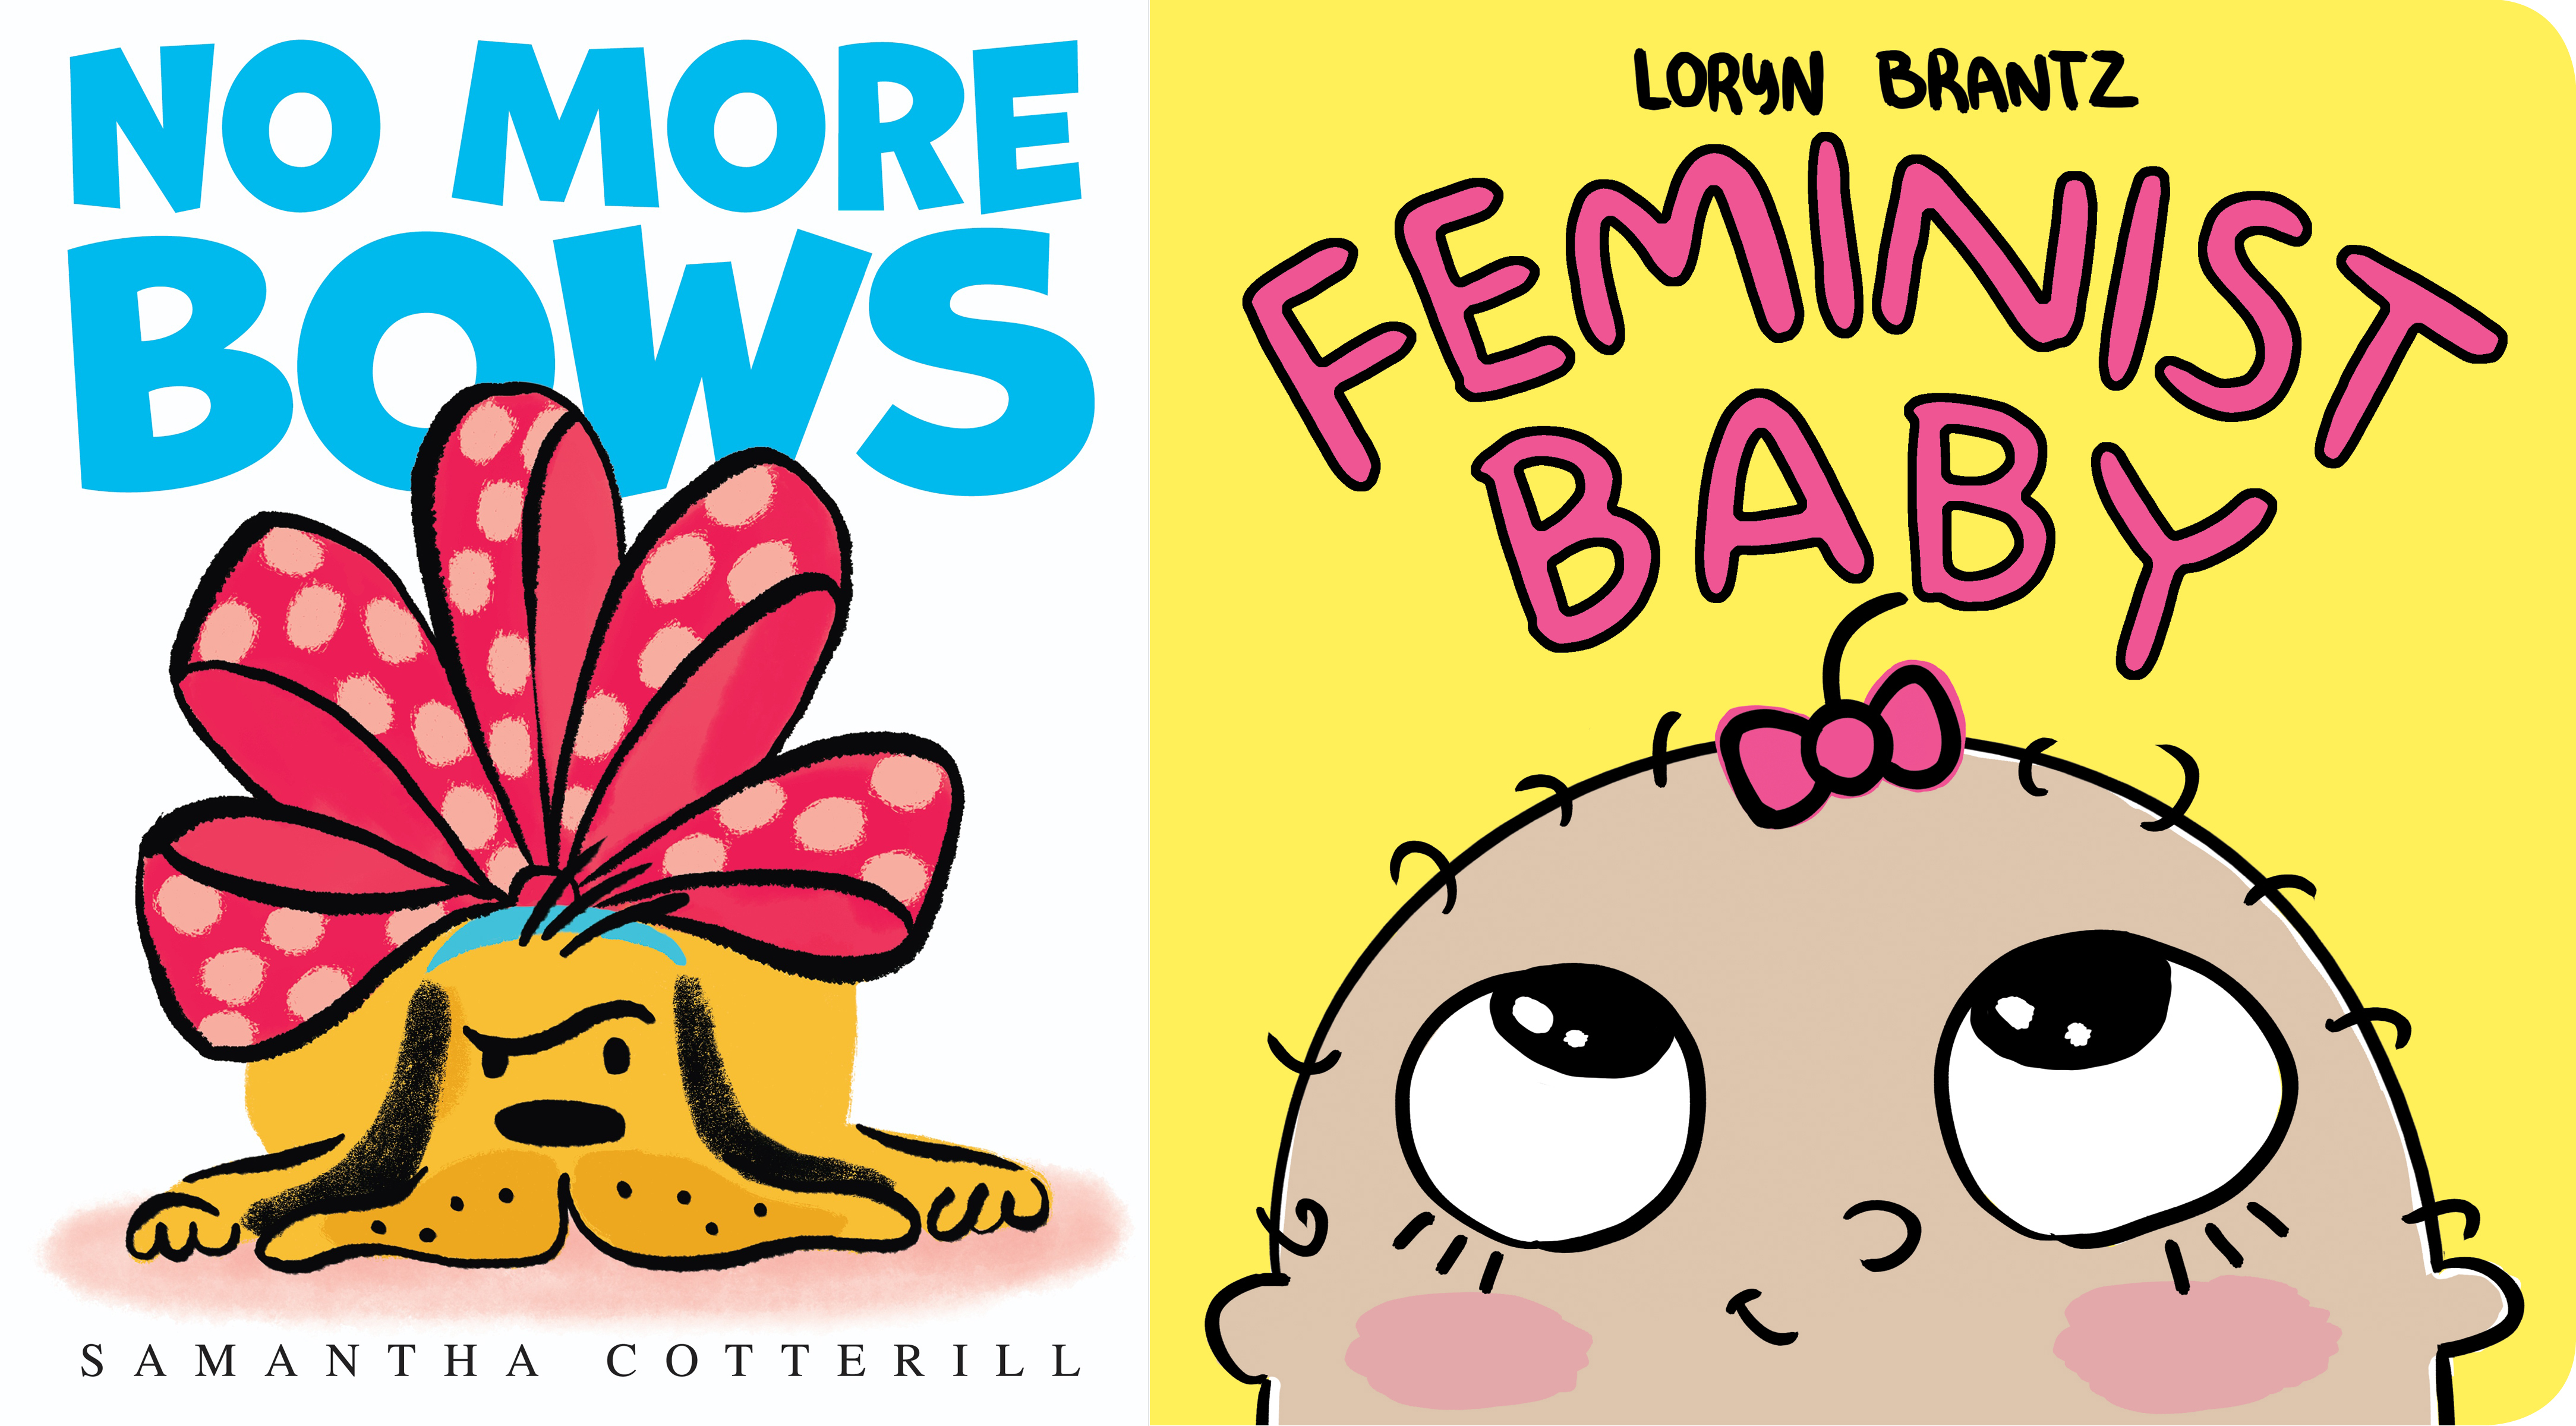 Joint Sunday Story Time with Samantha Cotterill (author & illustrator of No More Bows) and Loryn Brantz (author & illustrator of Feminist Baby)